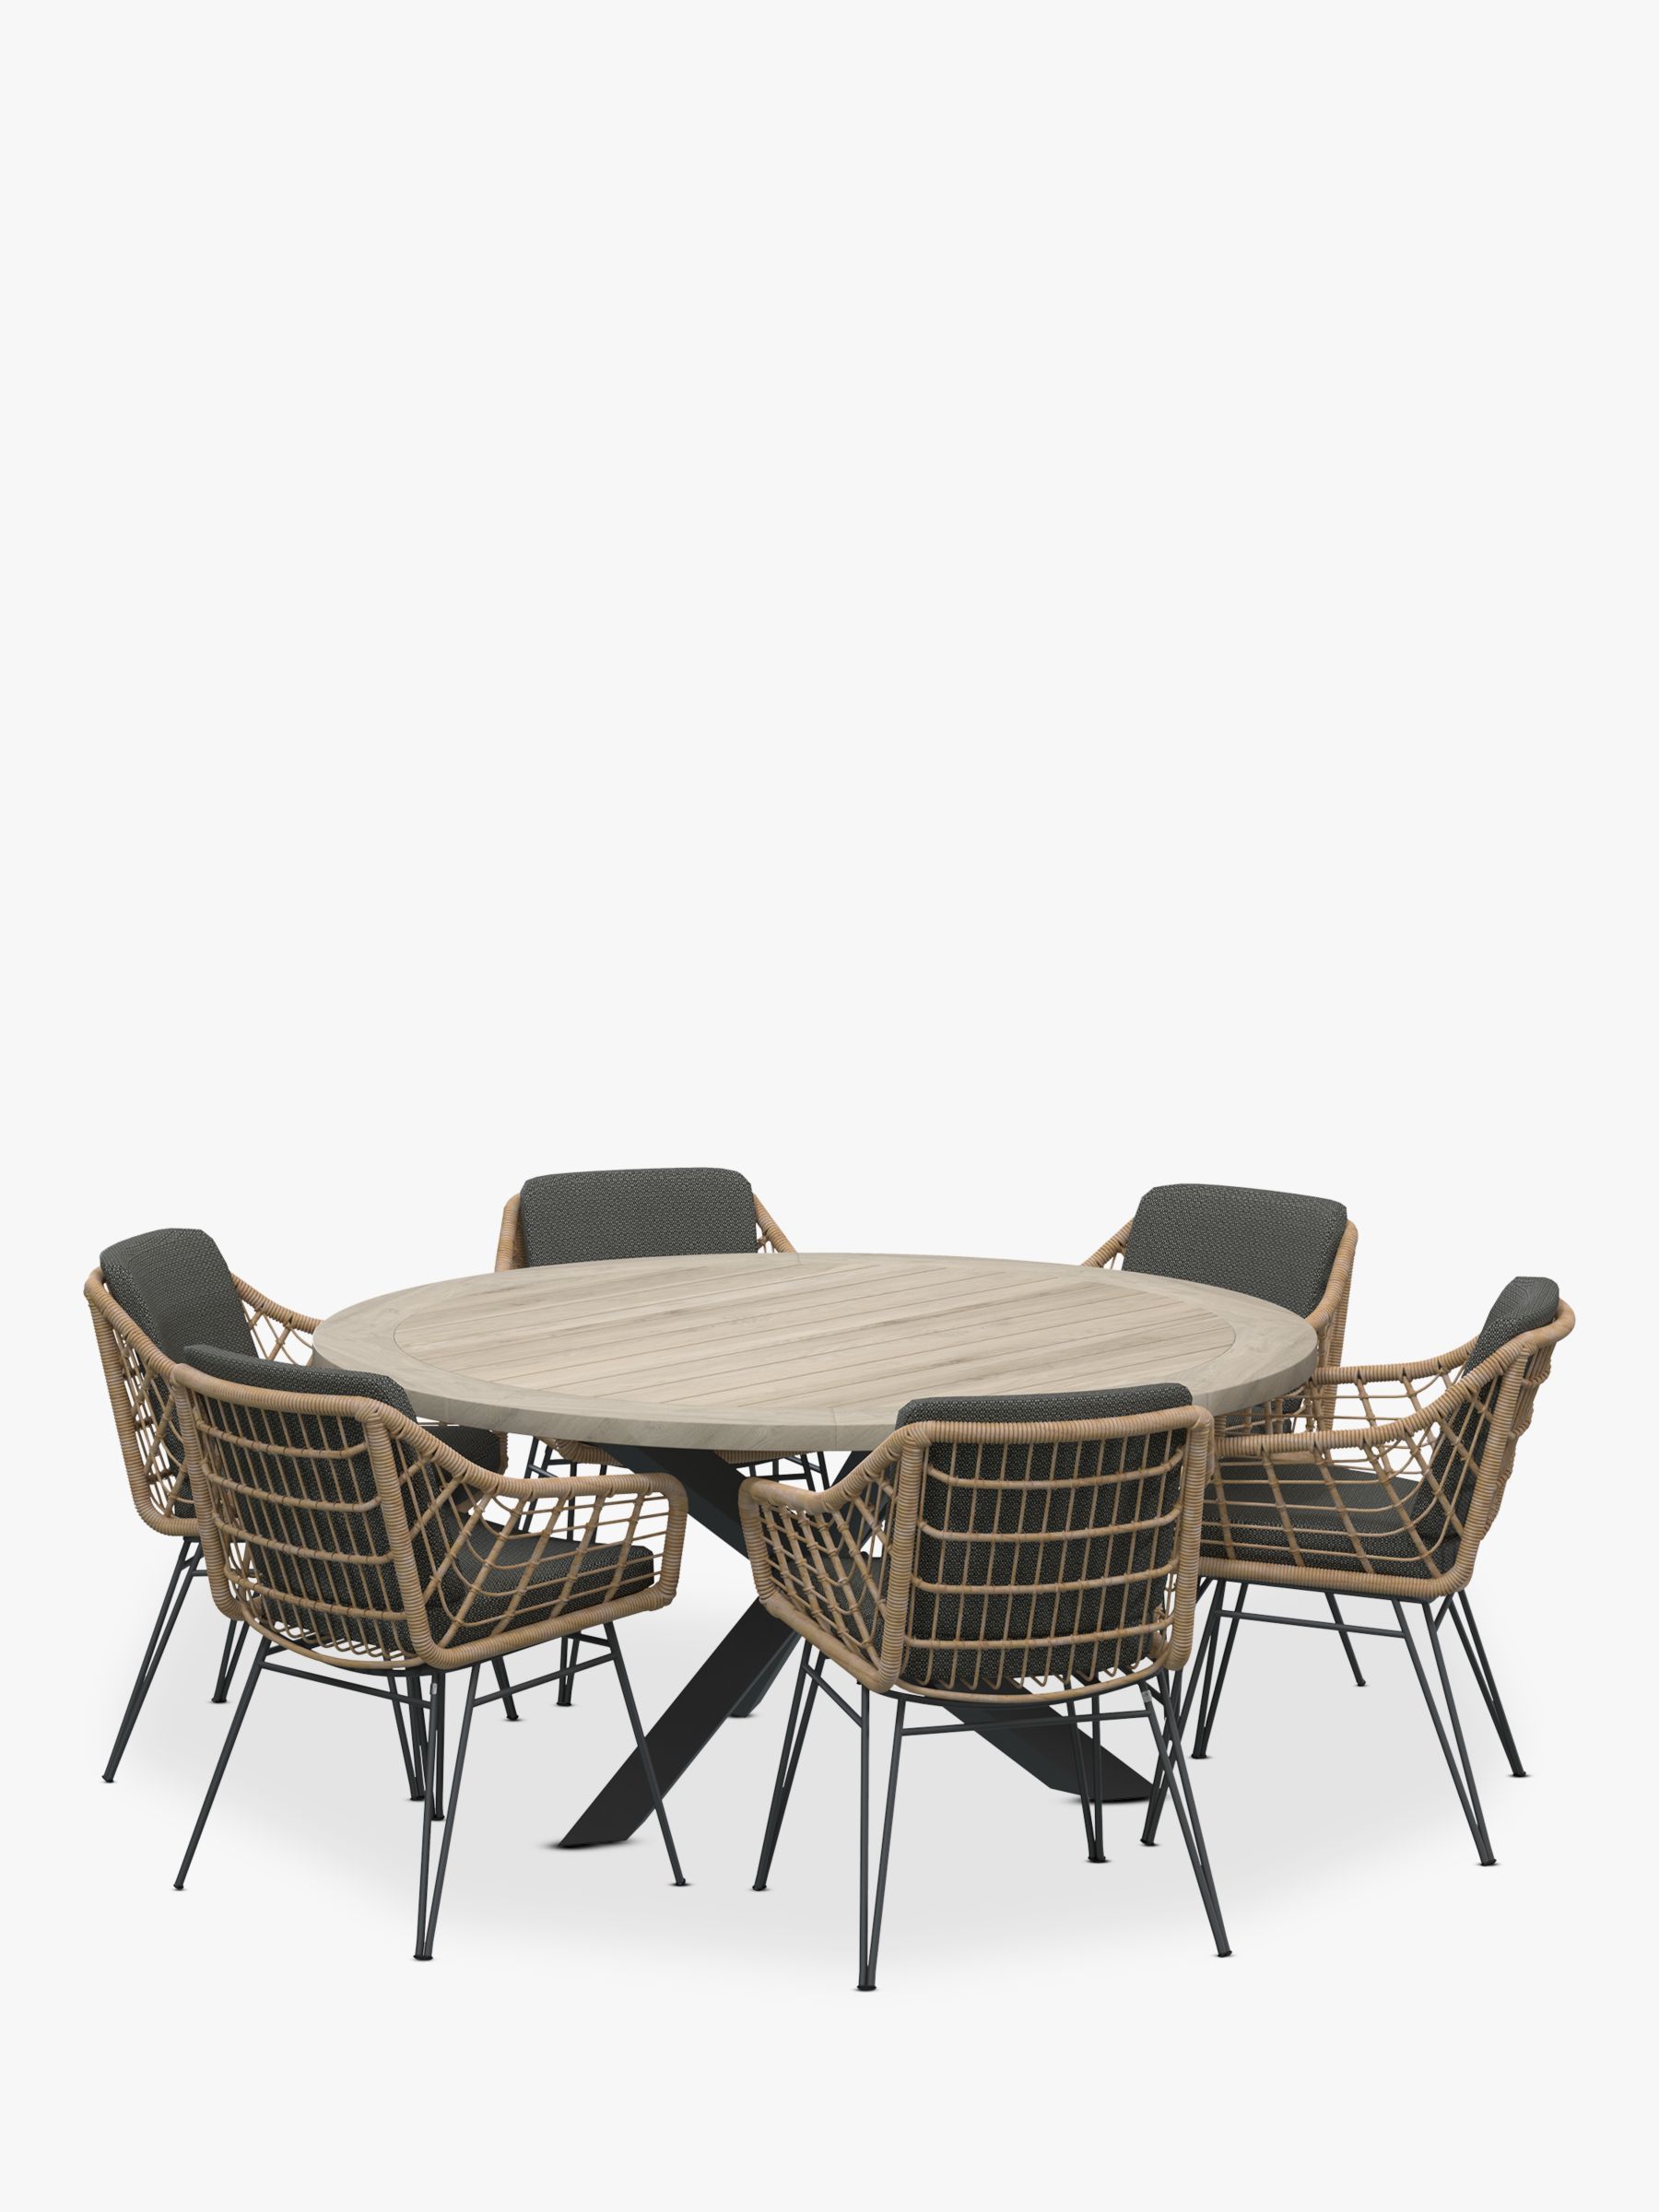 6 Seater Round Garden Dining Table, 6 Seater Round Dining Table And Chairs Outdoor